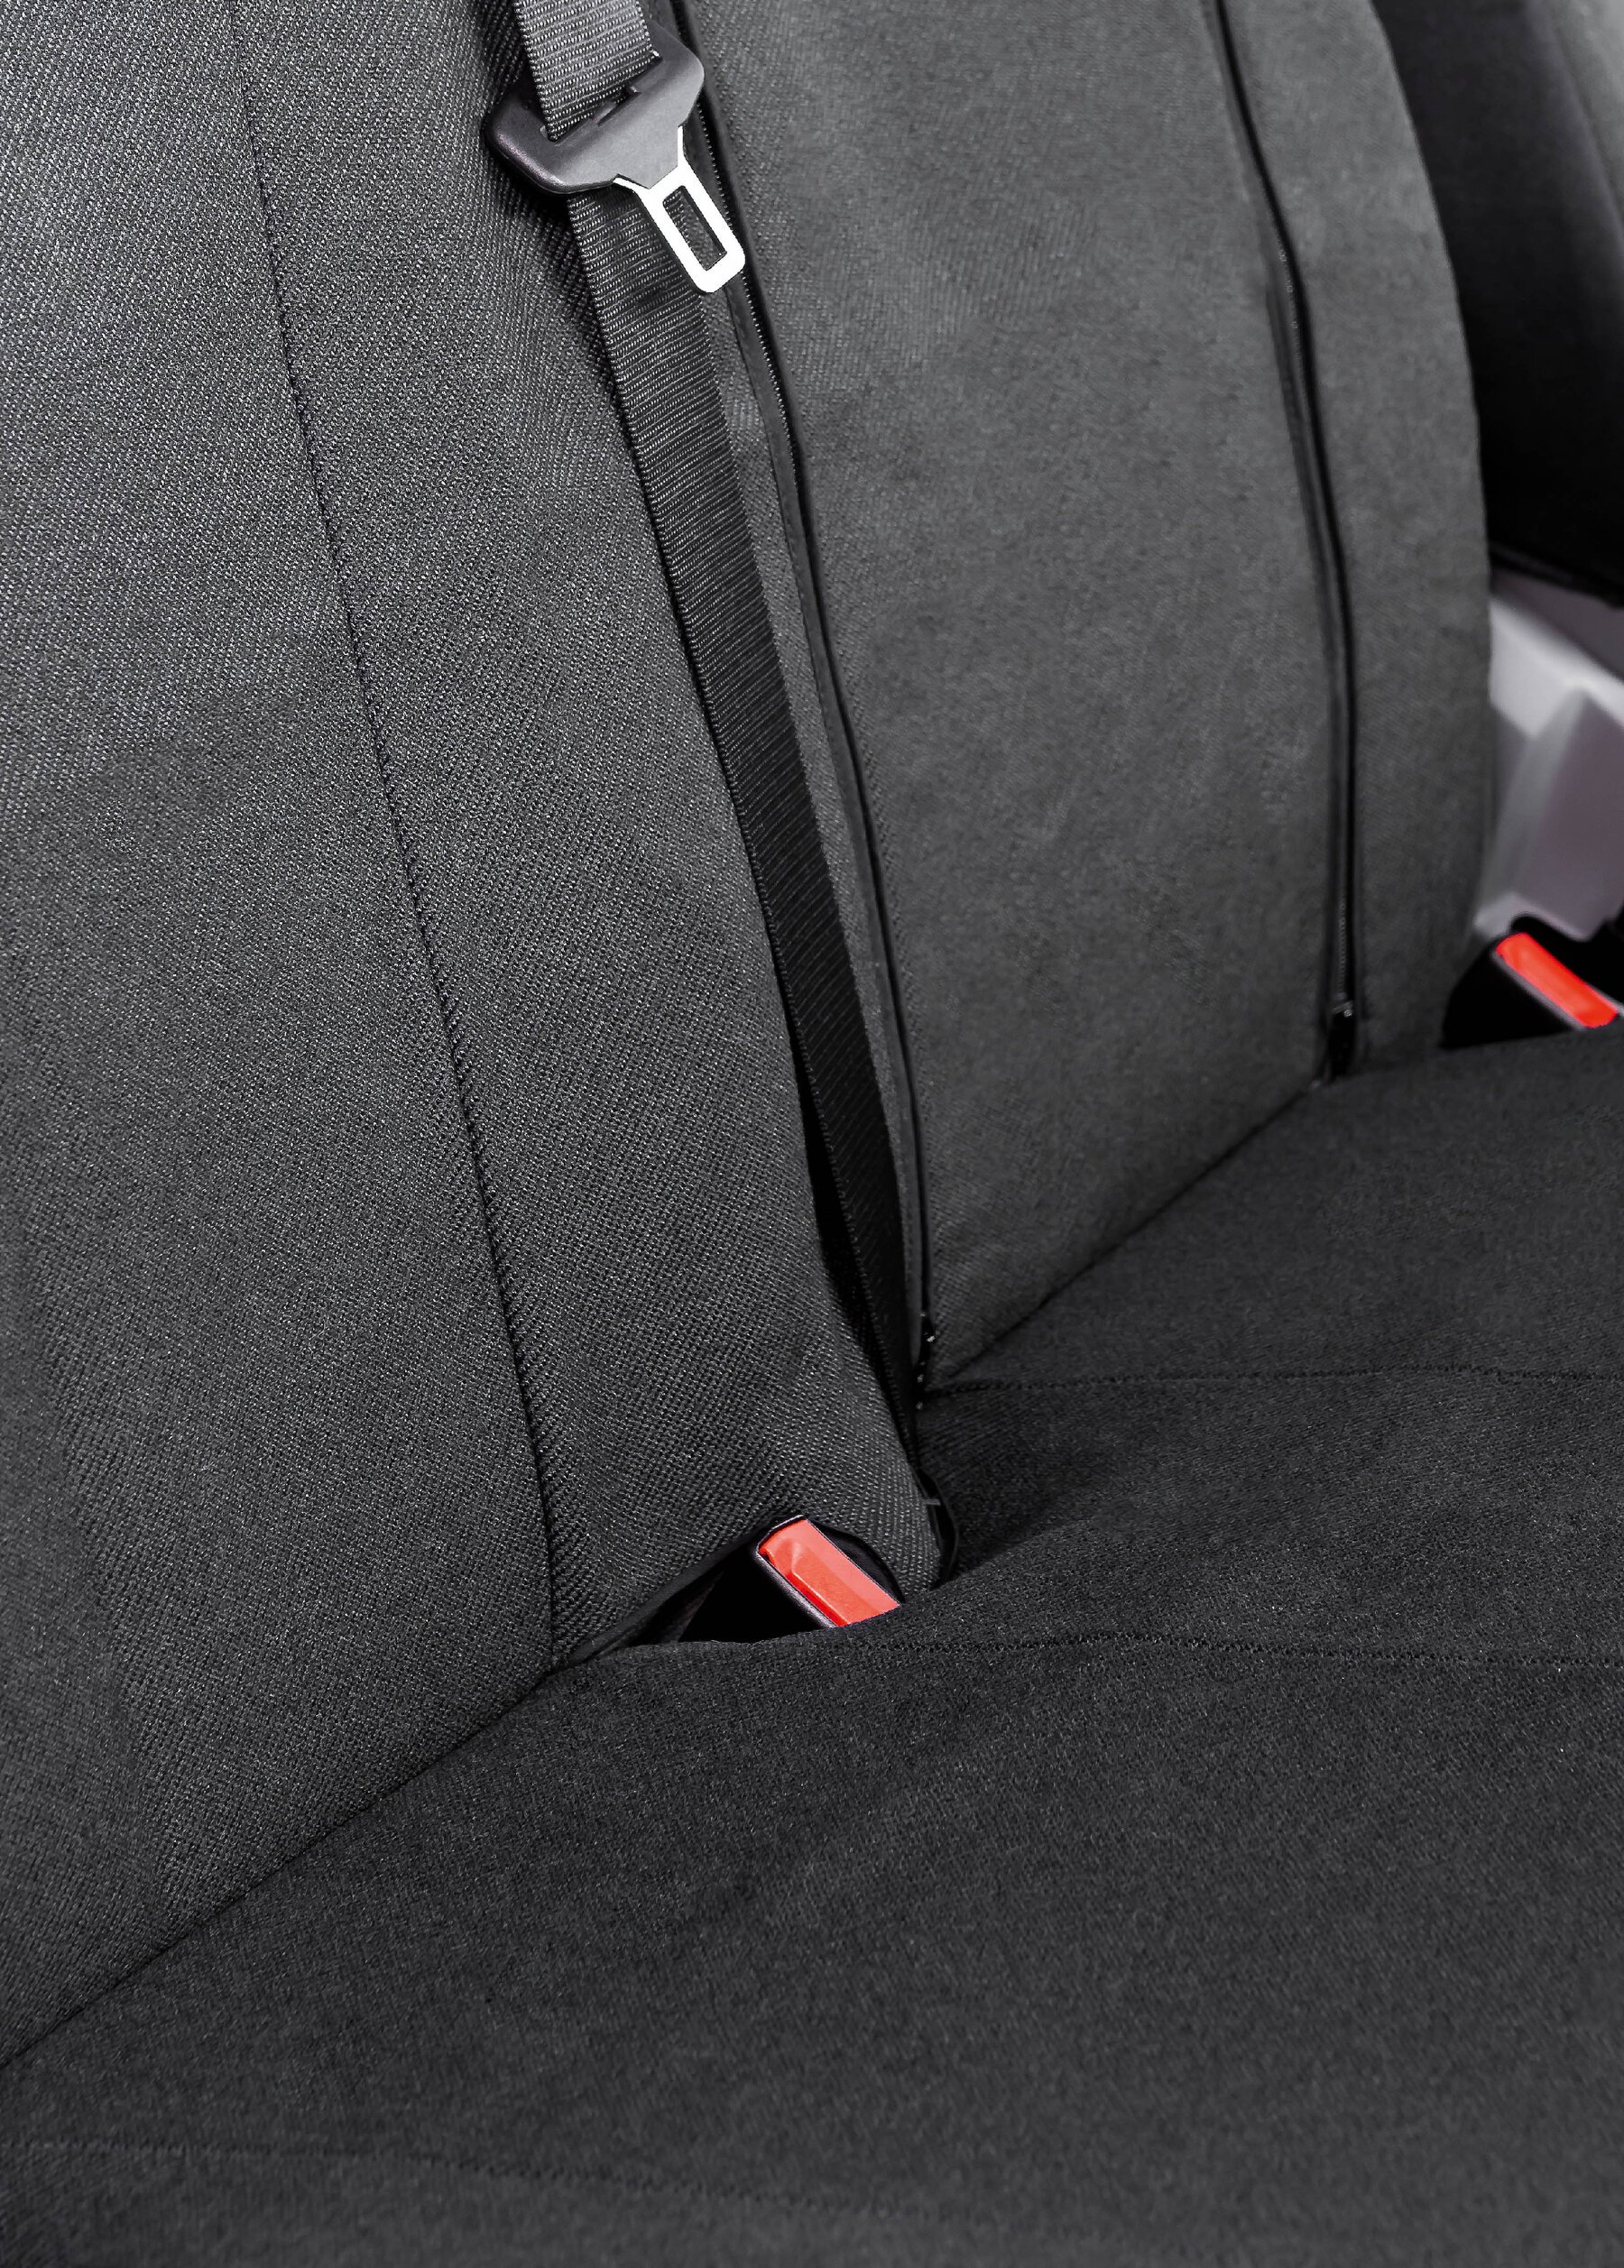 Car Seat cover Transporter made of fabric for VW LT, Mercedes Sprinter, single & double seat